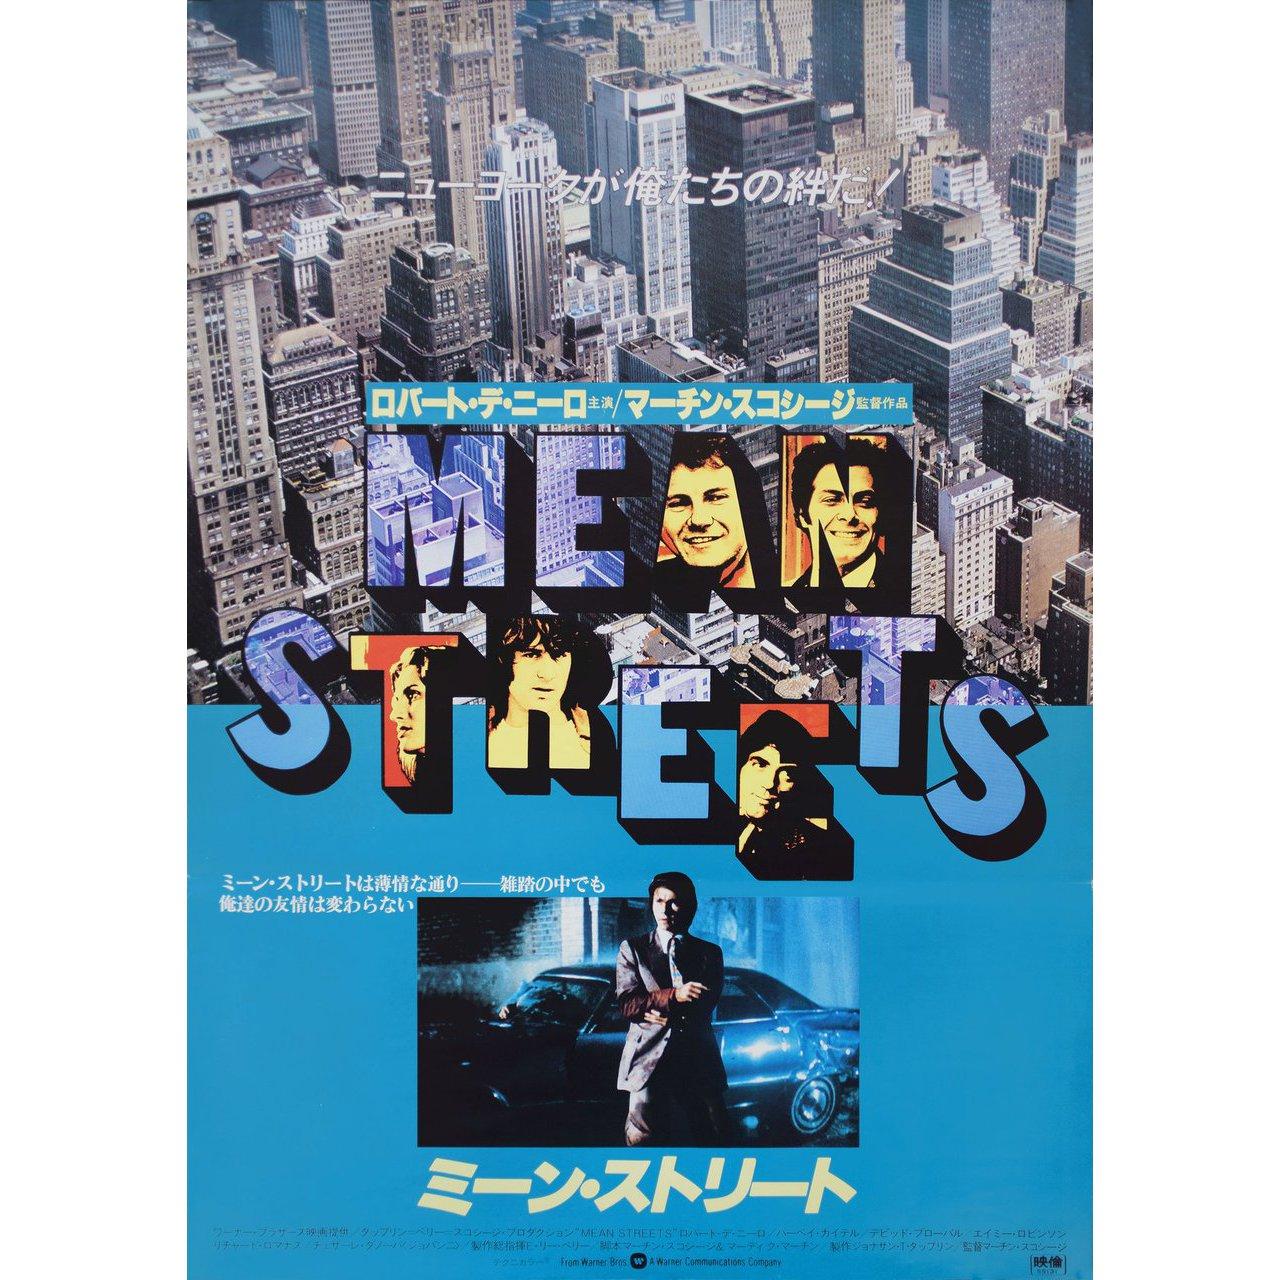 Mean Streets 1980 Japanese B2 Film Poster